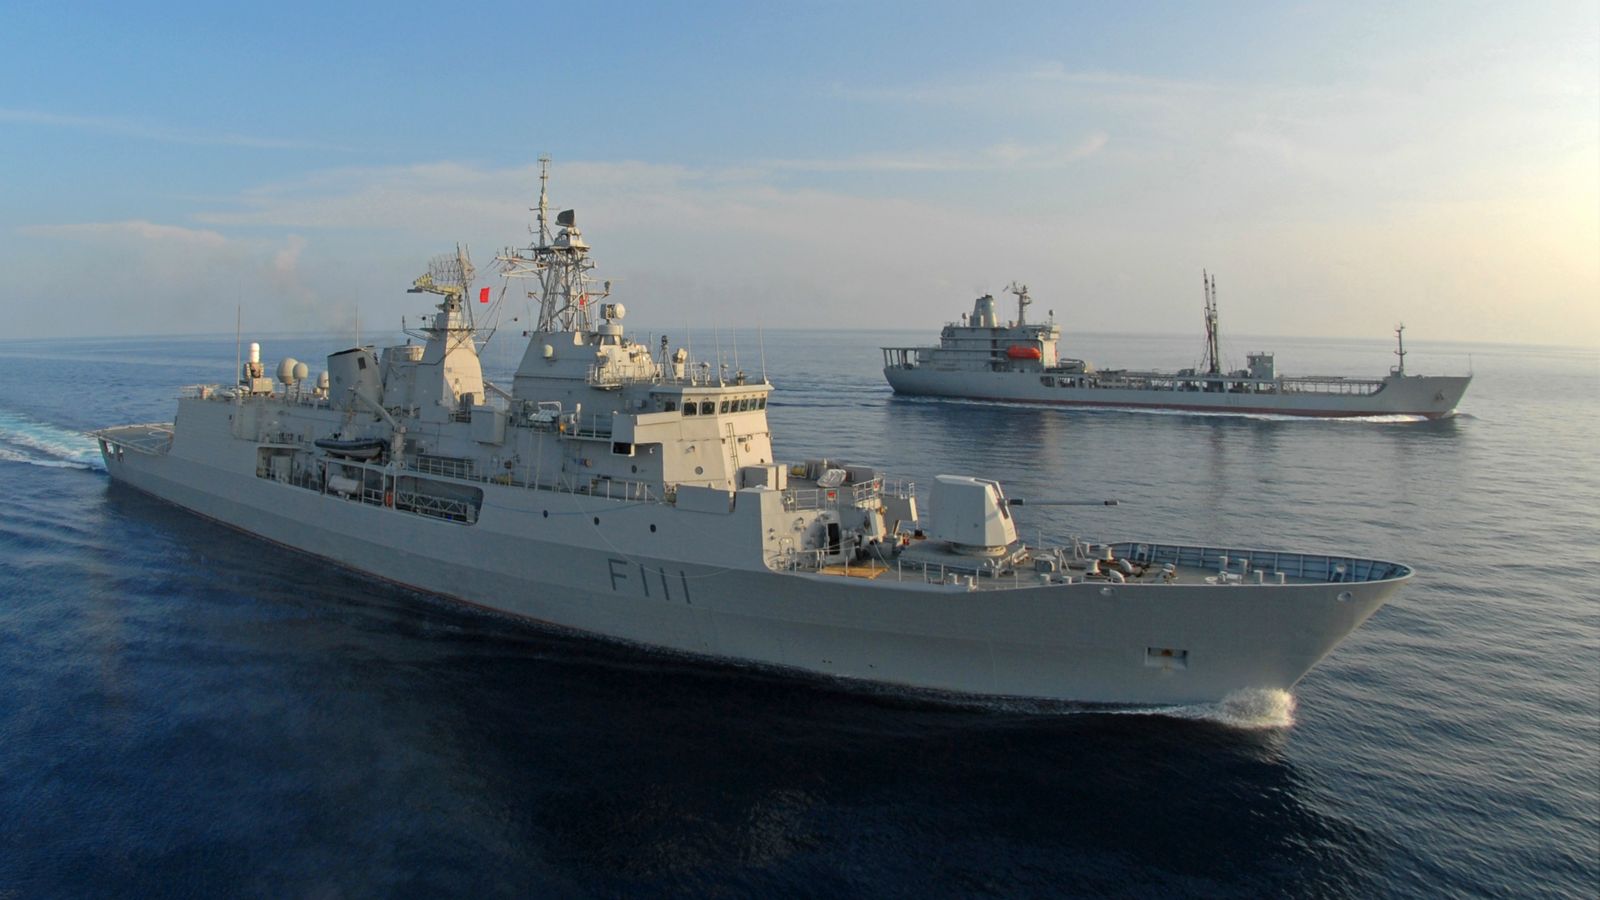 2 NZ Navy ships – Te Mana at sea with HMNZS Endeavour in the background.